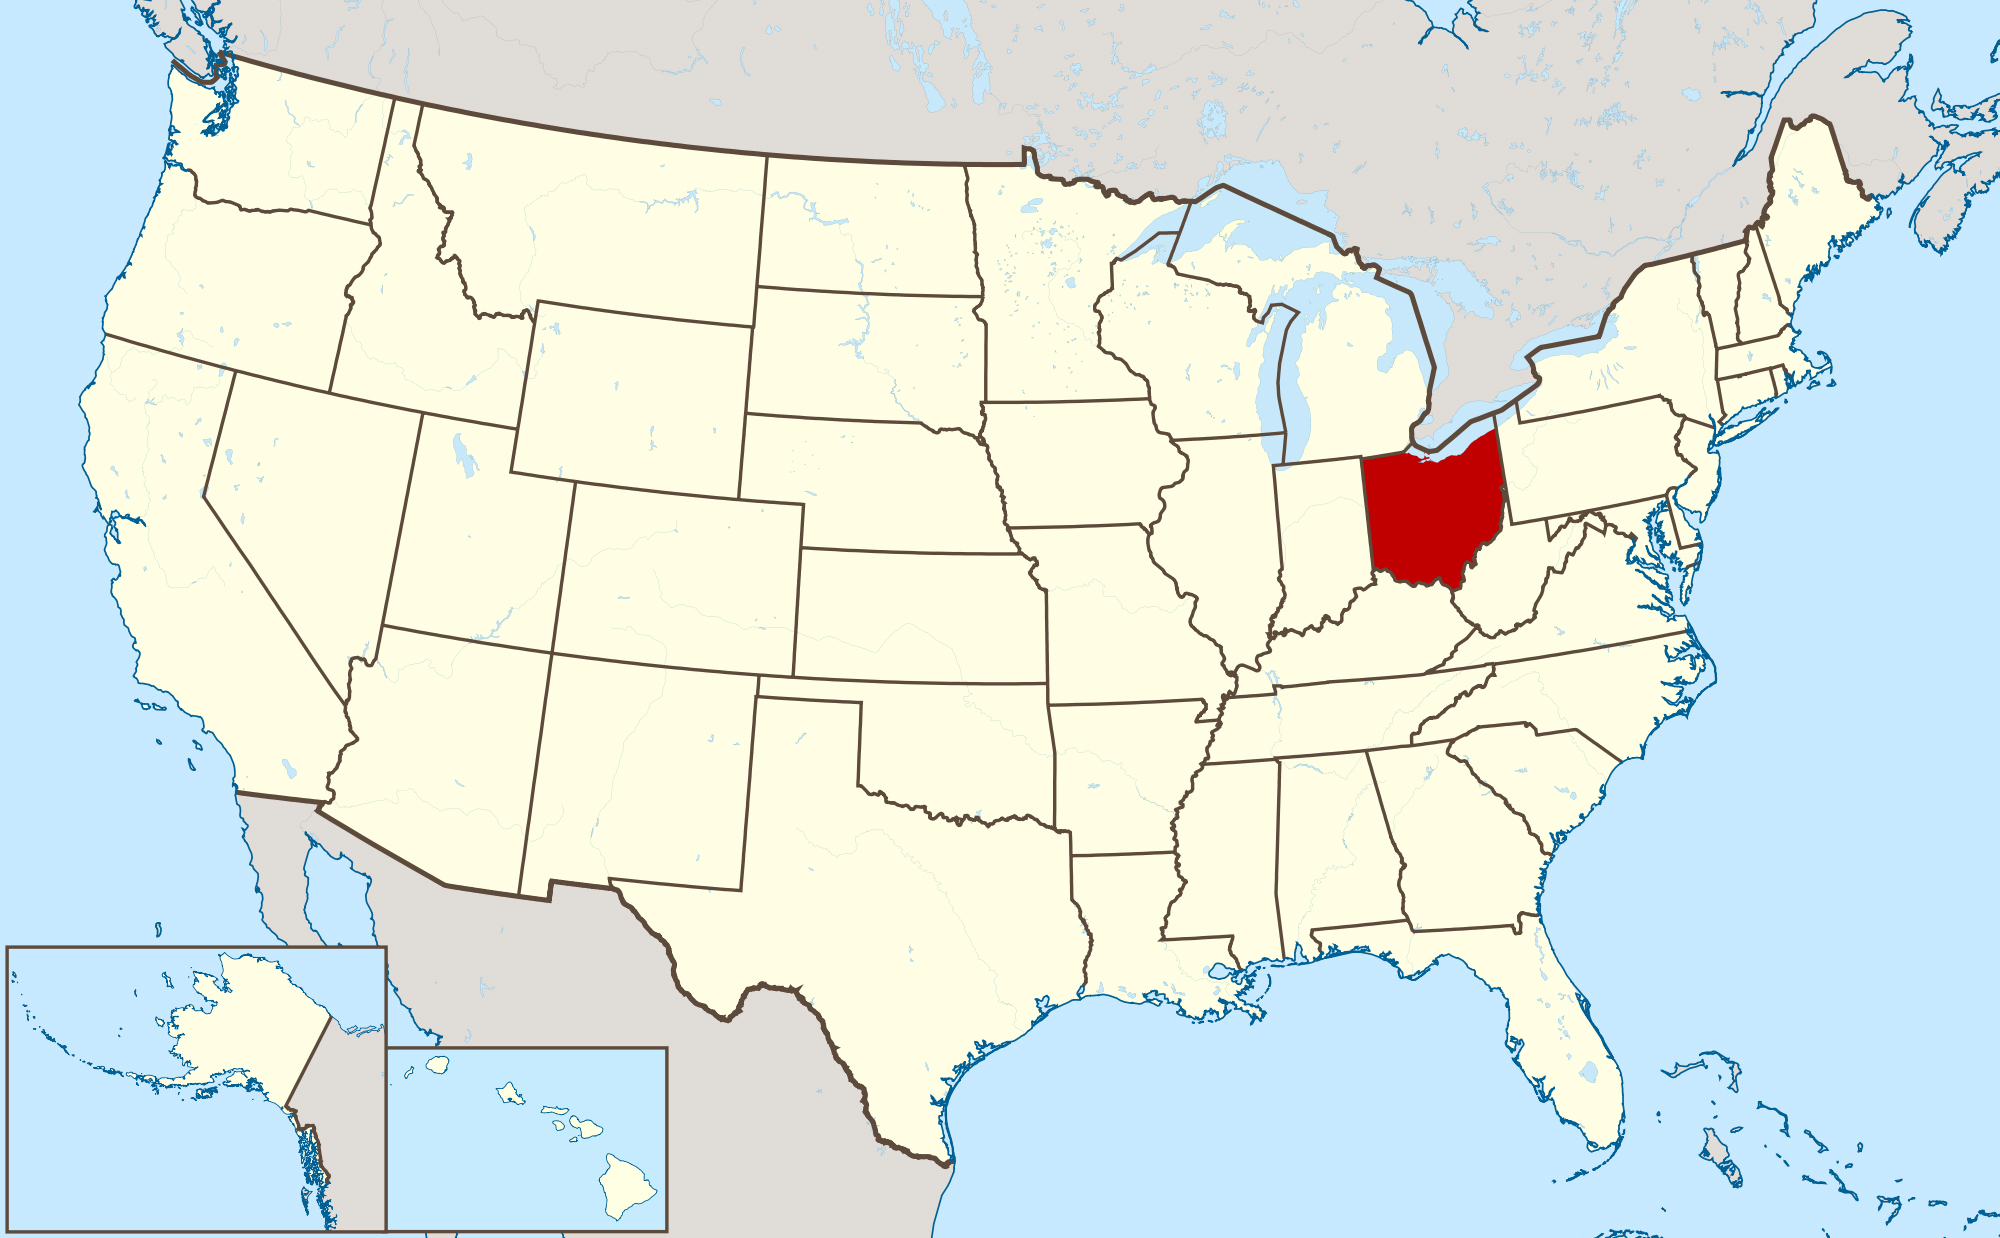 map of ohio state